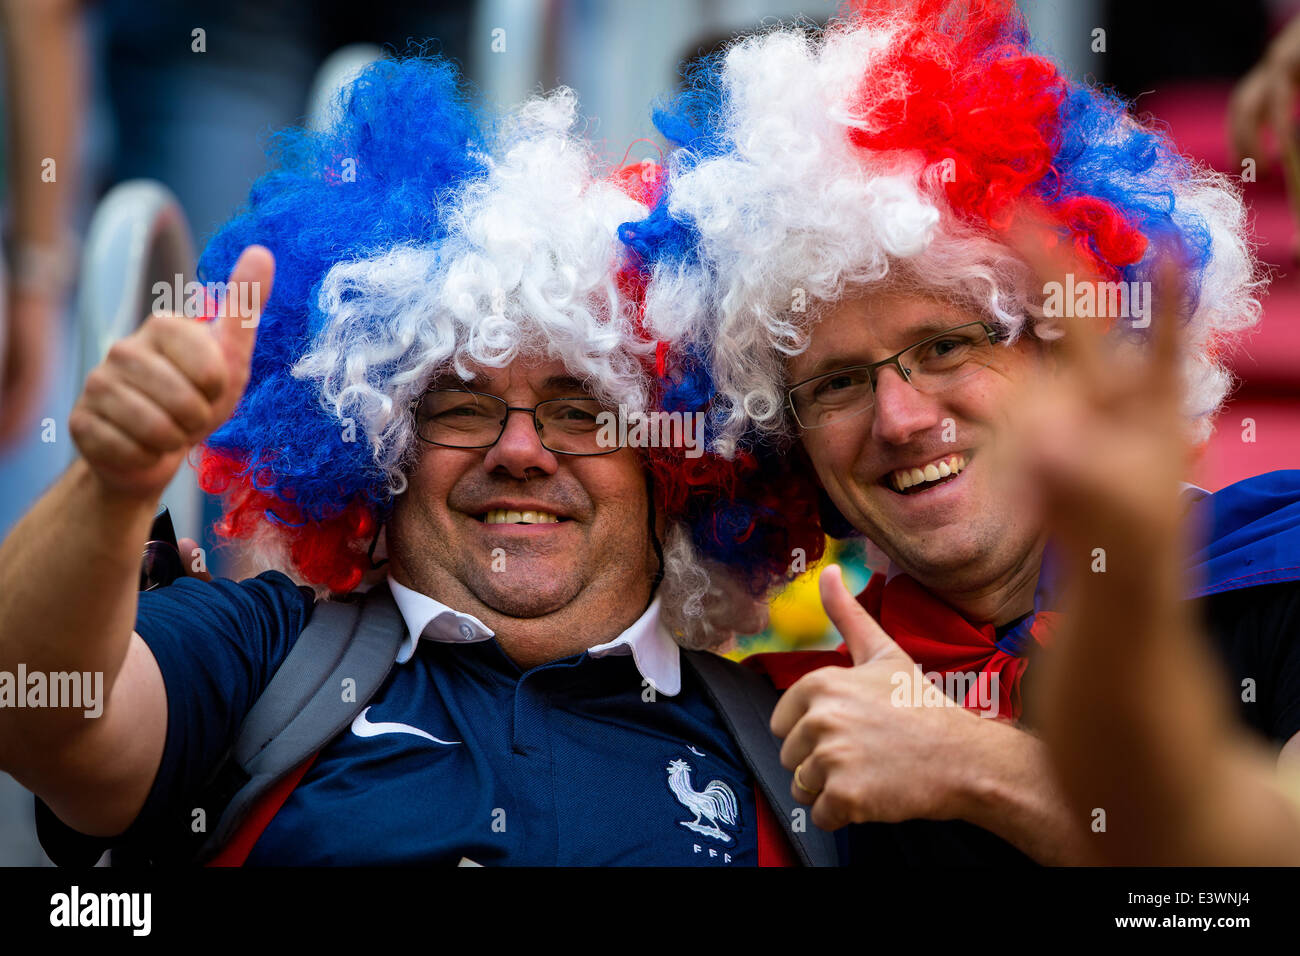 Brasilia, Brazil. 30th June, 2014. A France's fans pose before a Round of 16 match between France and Nigeria of 2014 FIFA World Cup at the Estadio Nacional Stadium in Brasilia, Brazil, on June 30, 2014. Credit:  Liu Bin/Xinhua/Alamy Live News Stock Photo